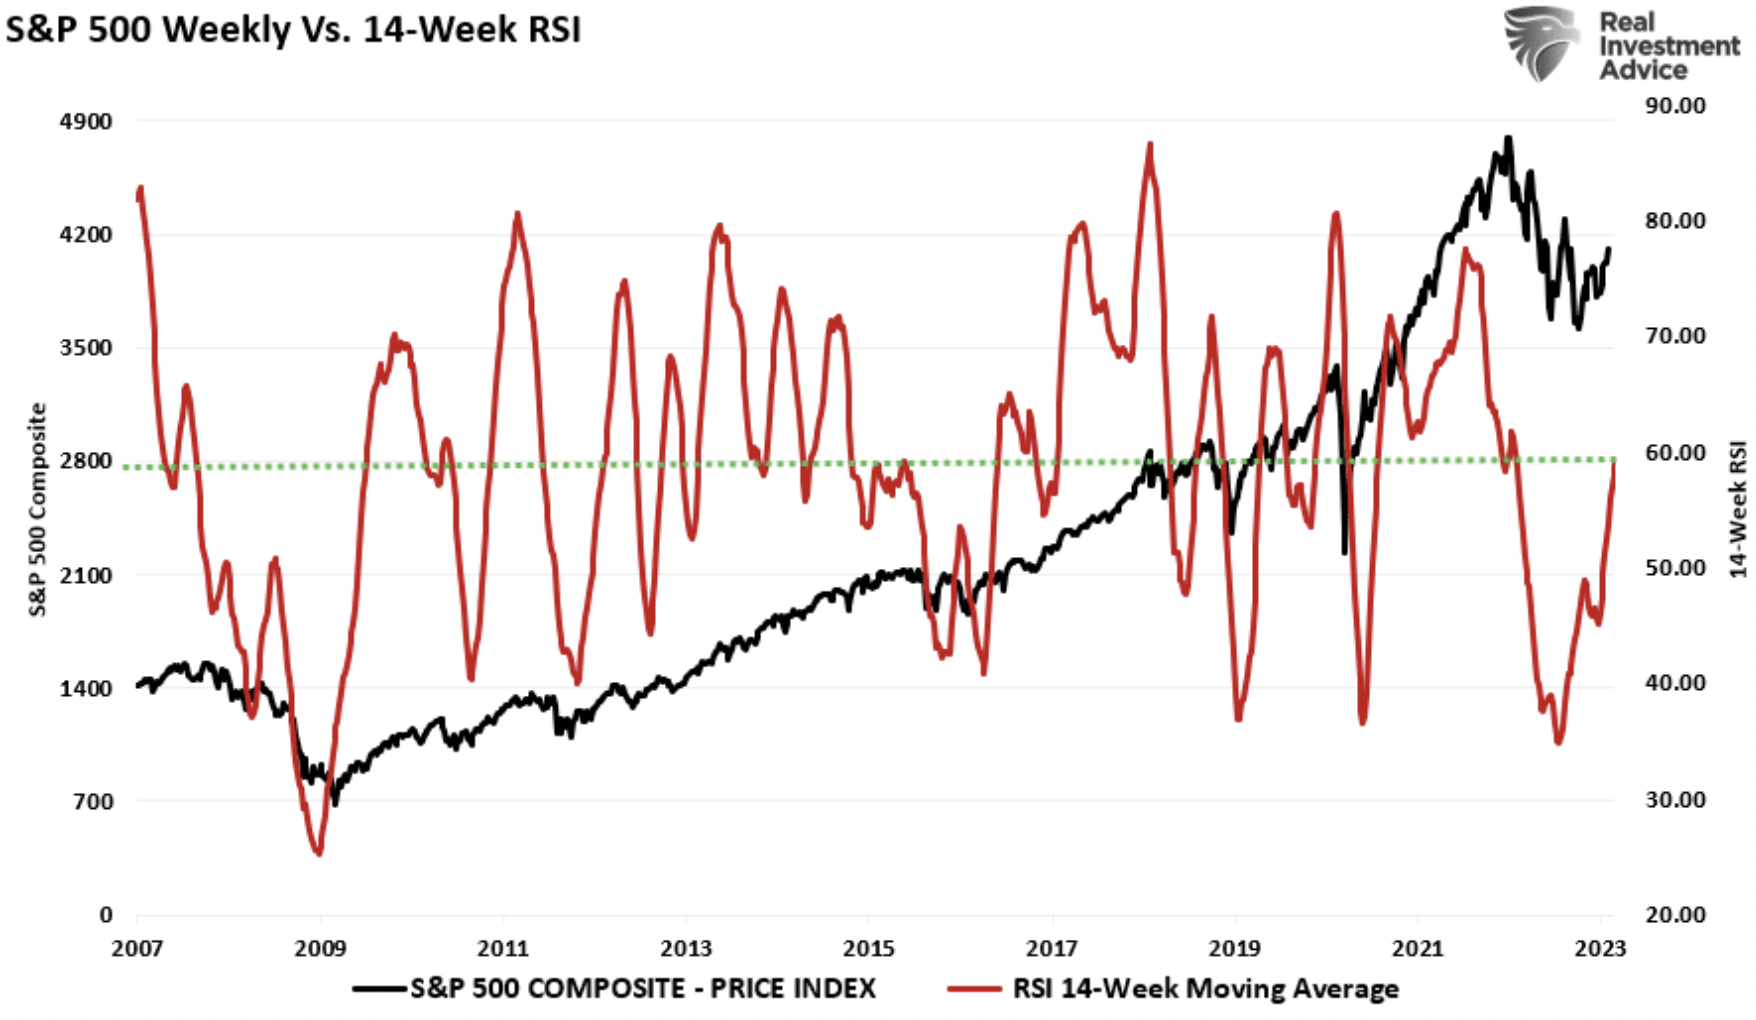 S&P 500 Weekly Moving Averages vs. RSI